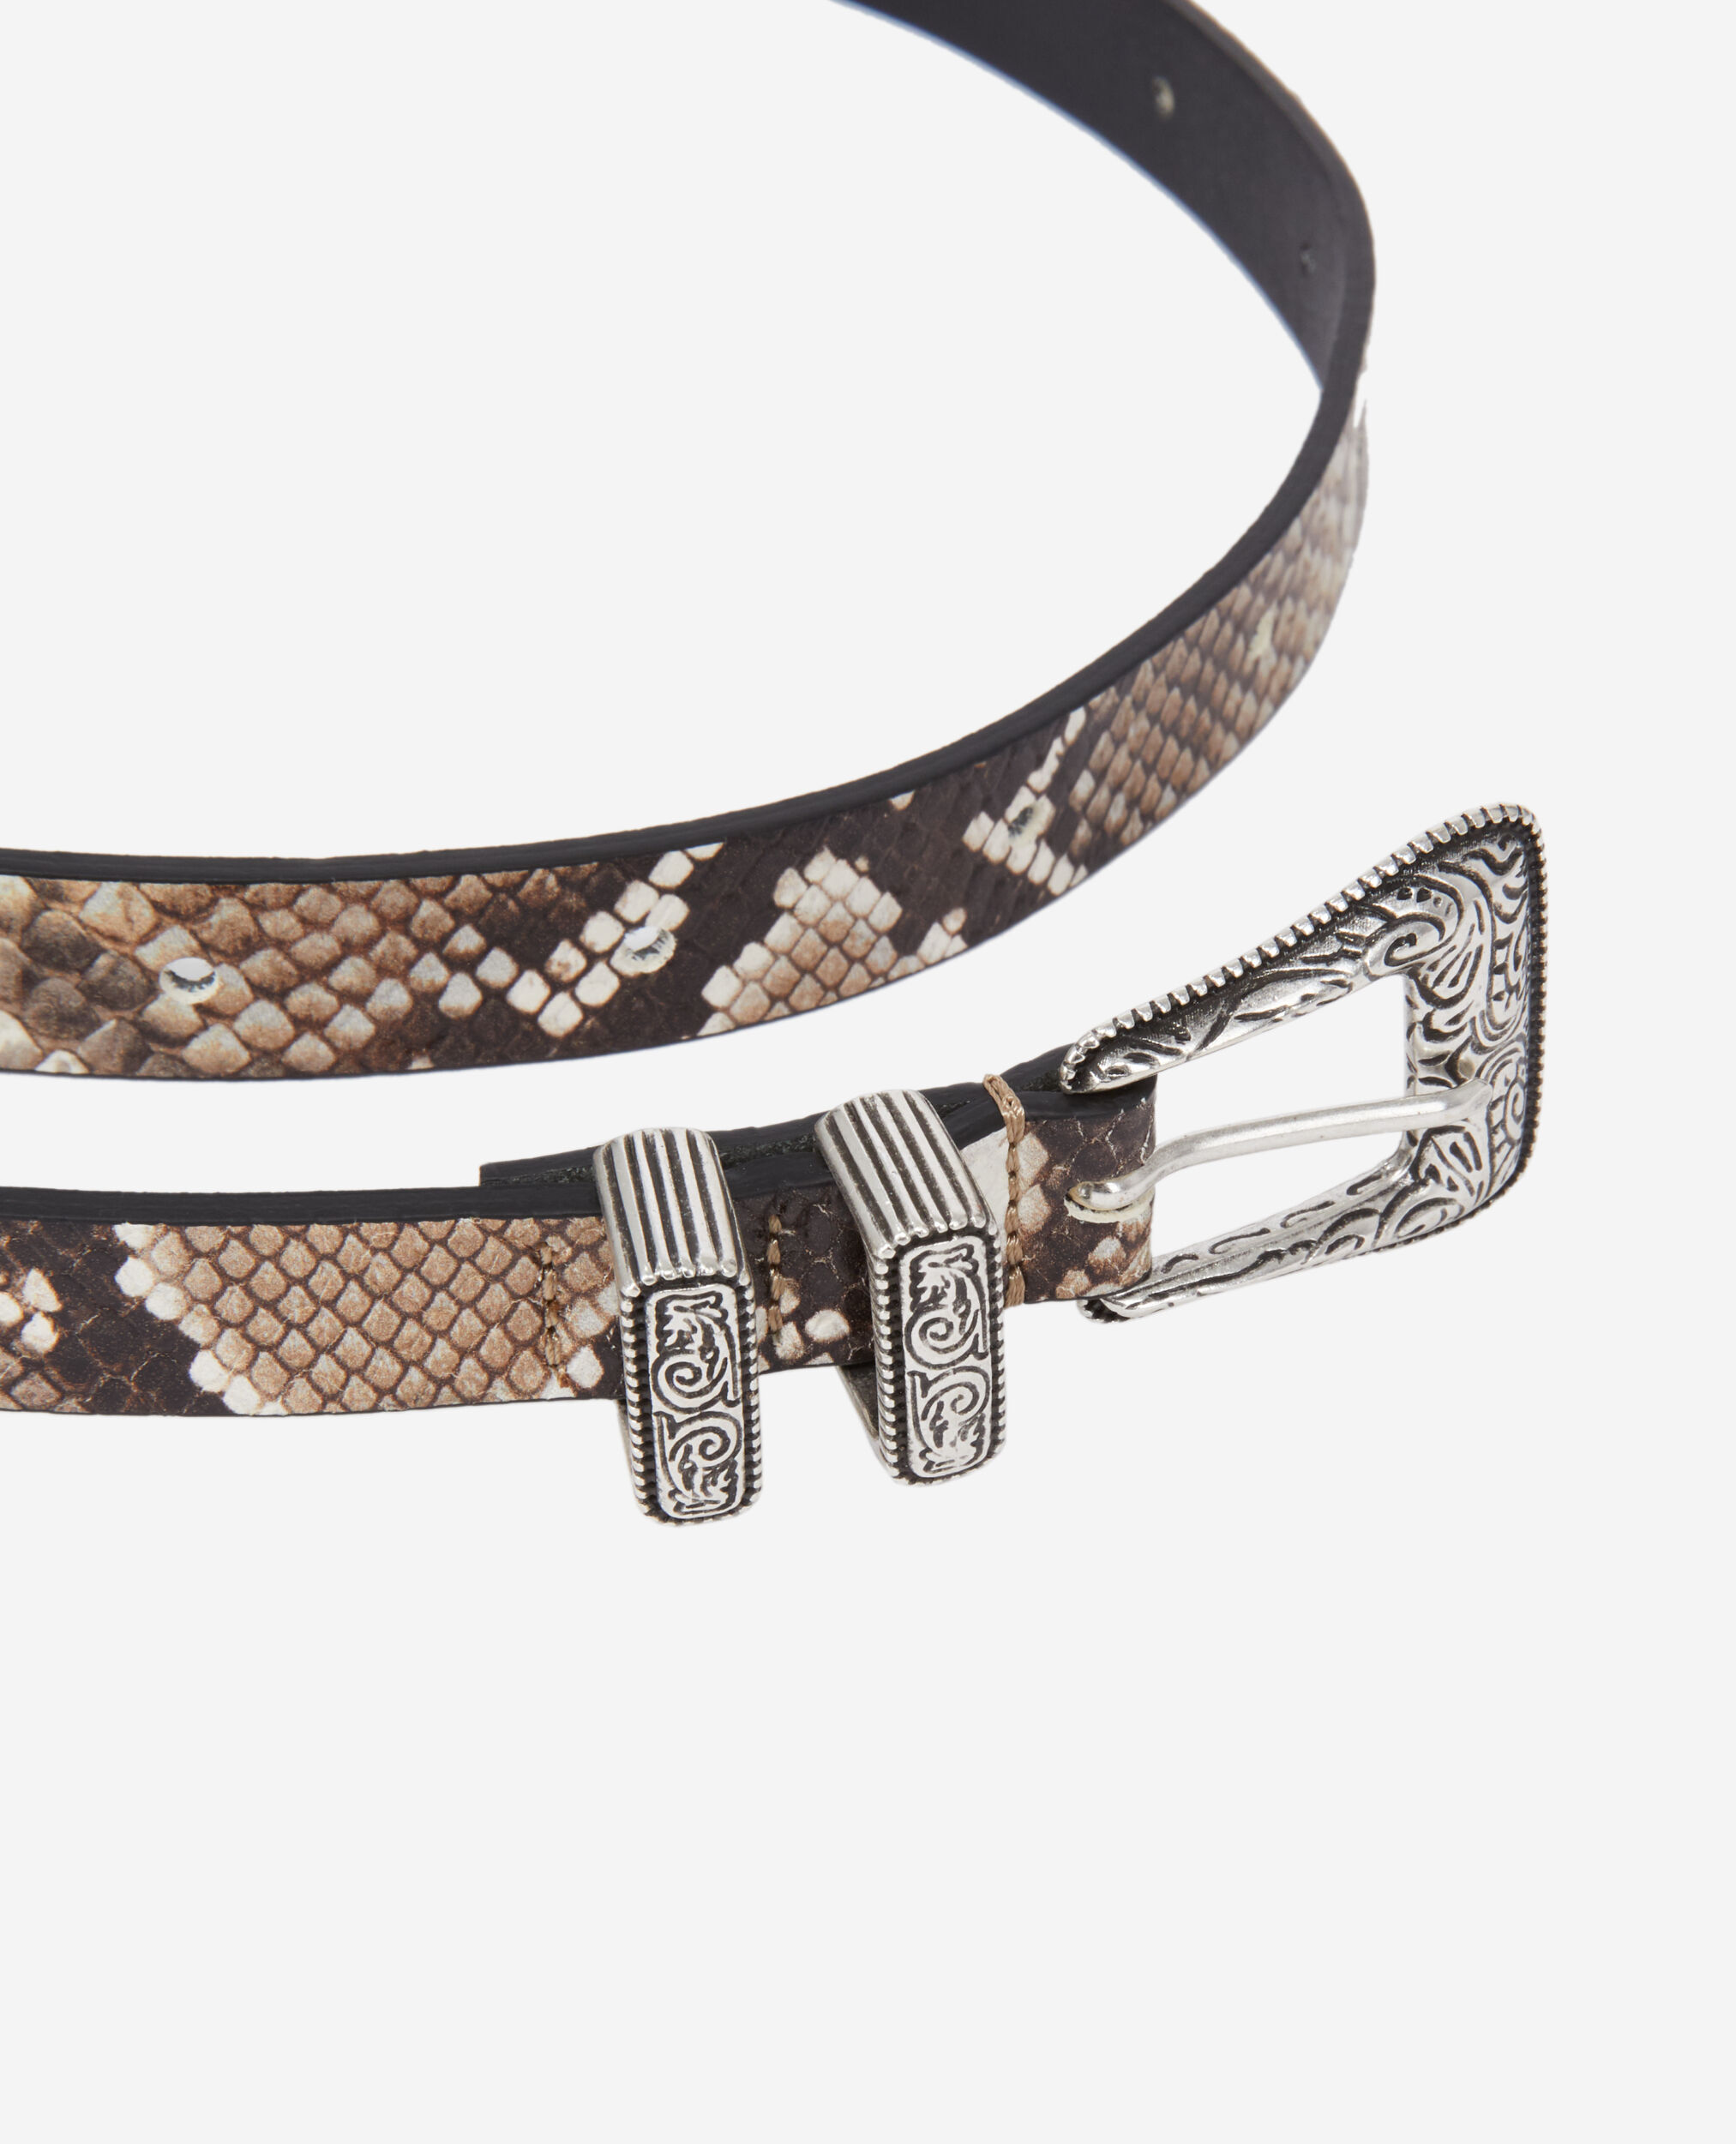 Thin snakeskin-effect leather belt with Western-style buckle, BEIGE-BROWN, hi-res image number null